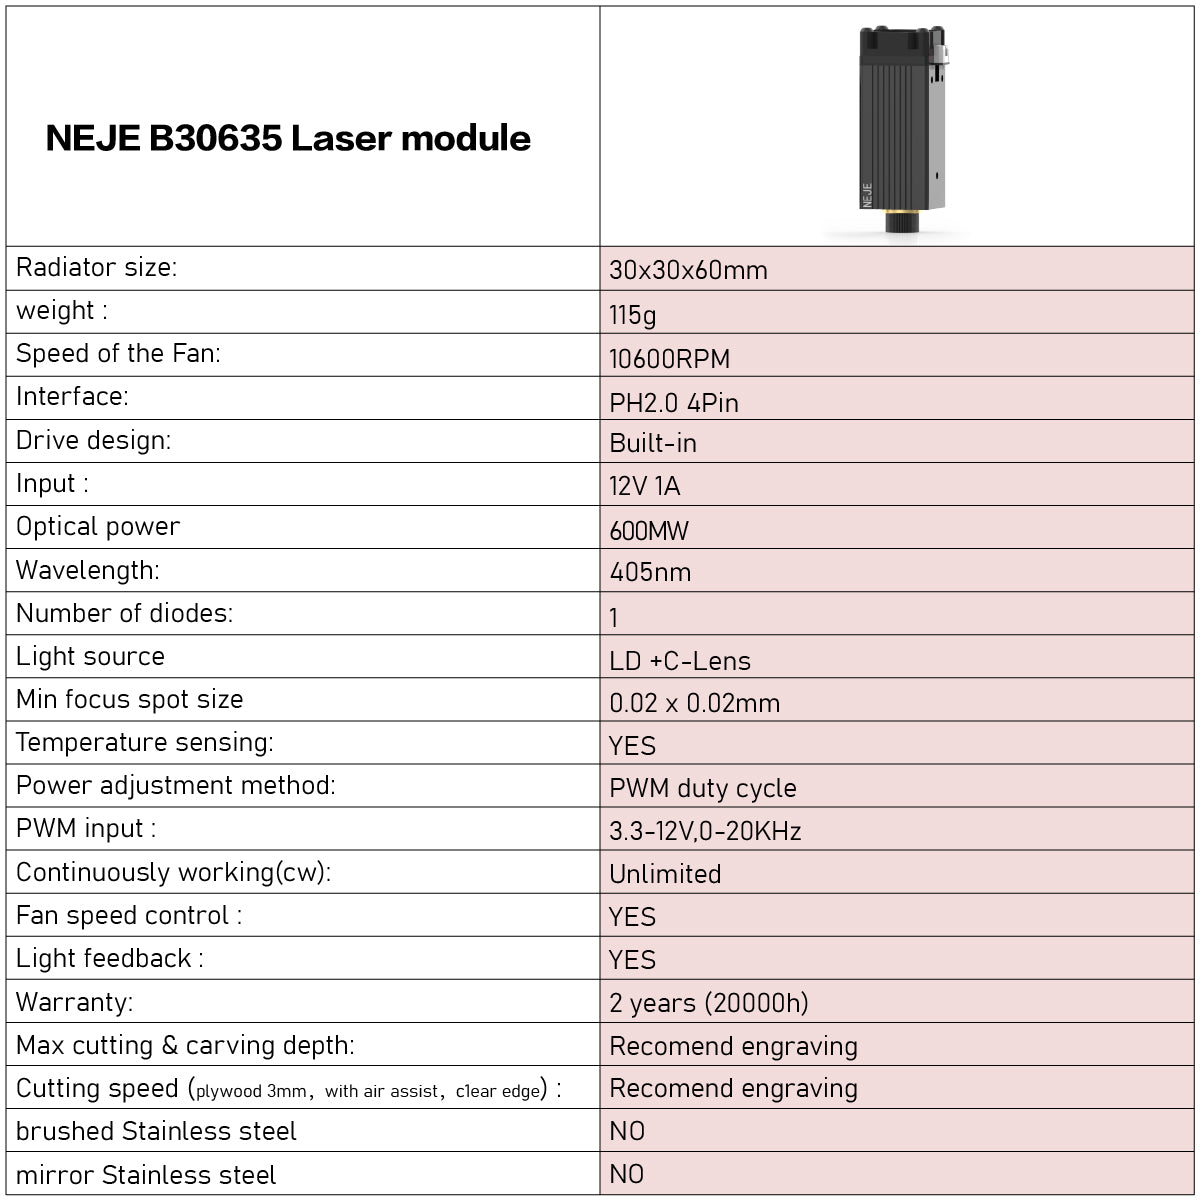 405nm 600mw 12V Laser Module for Grayscale Engraving, NEJE B30635 (3500MW updated model)